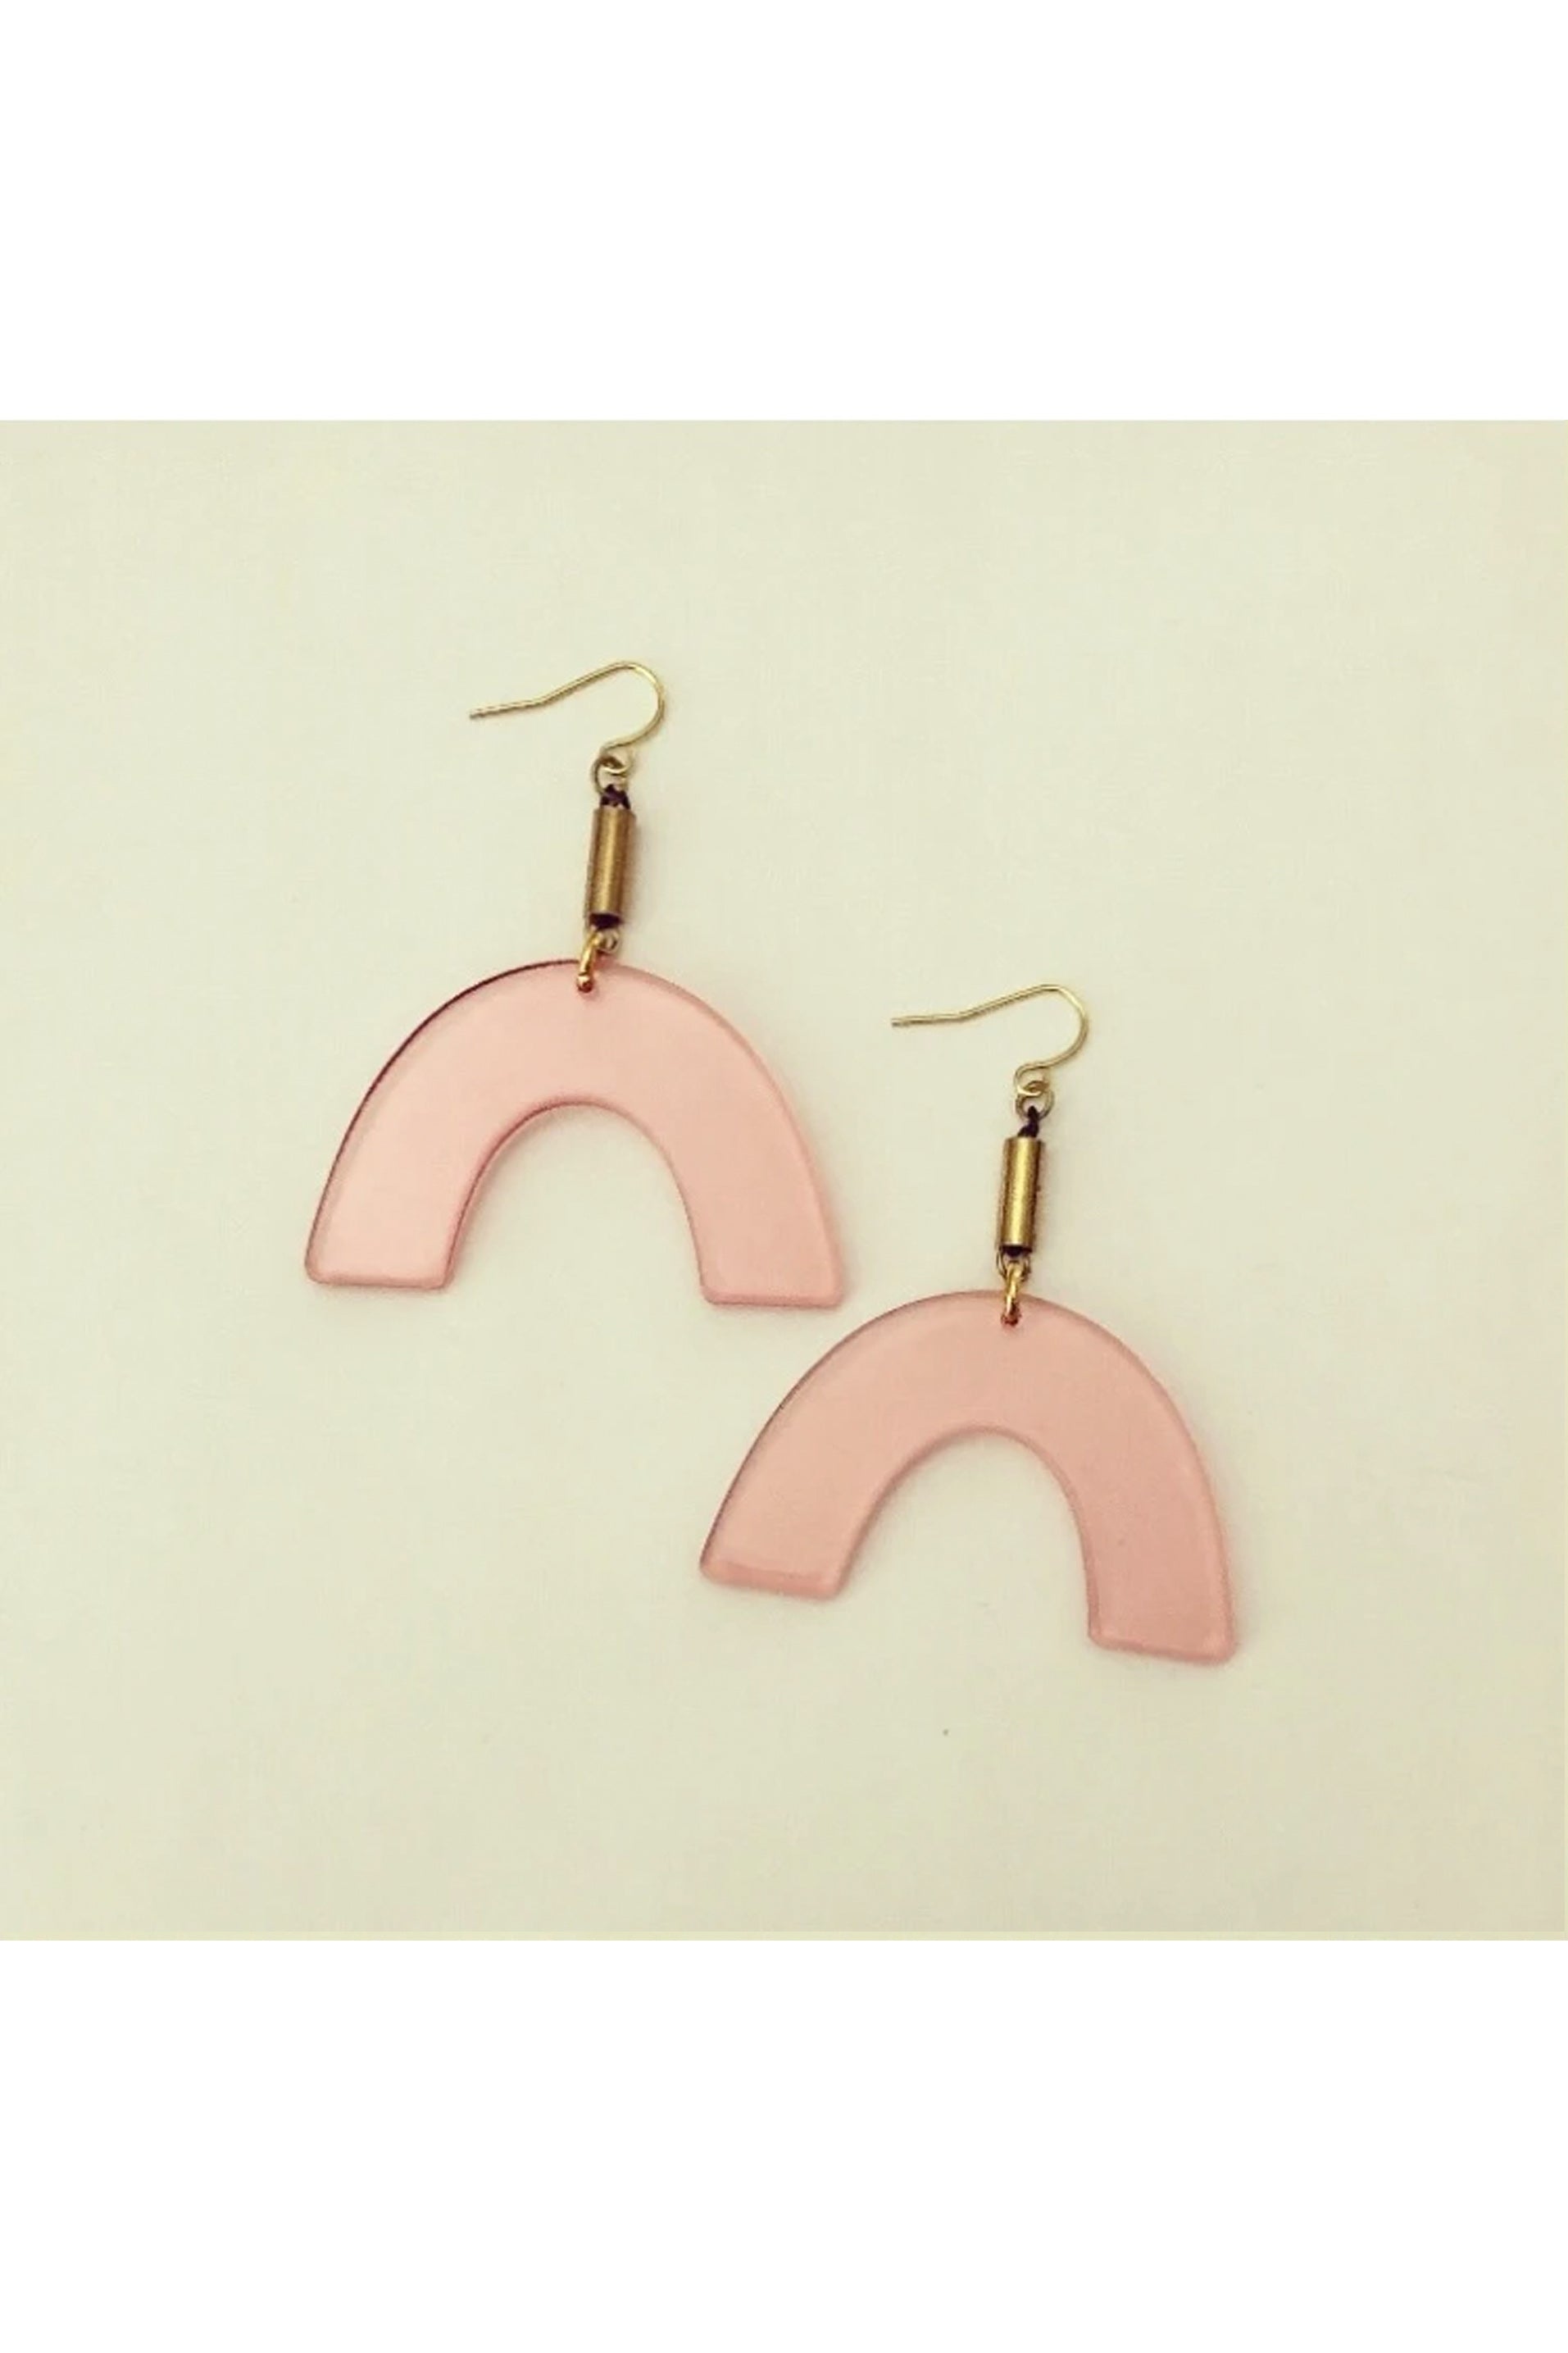 Vuttue dangle earring by Darlings of Denmark; semi-transparent pink acrylic arches hanging off raw brass tubes; flat lay